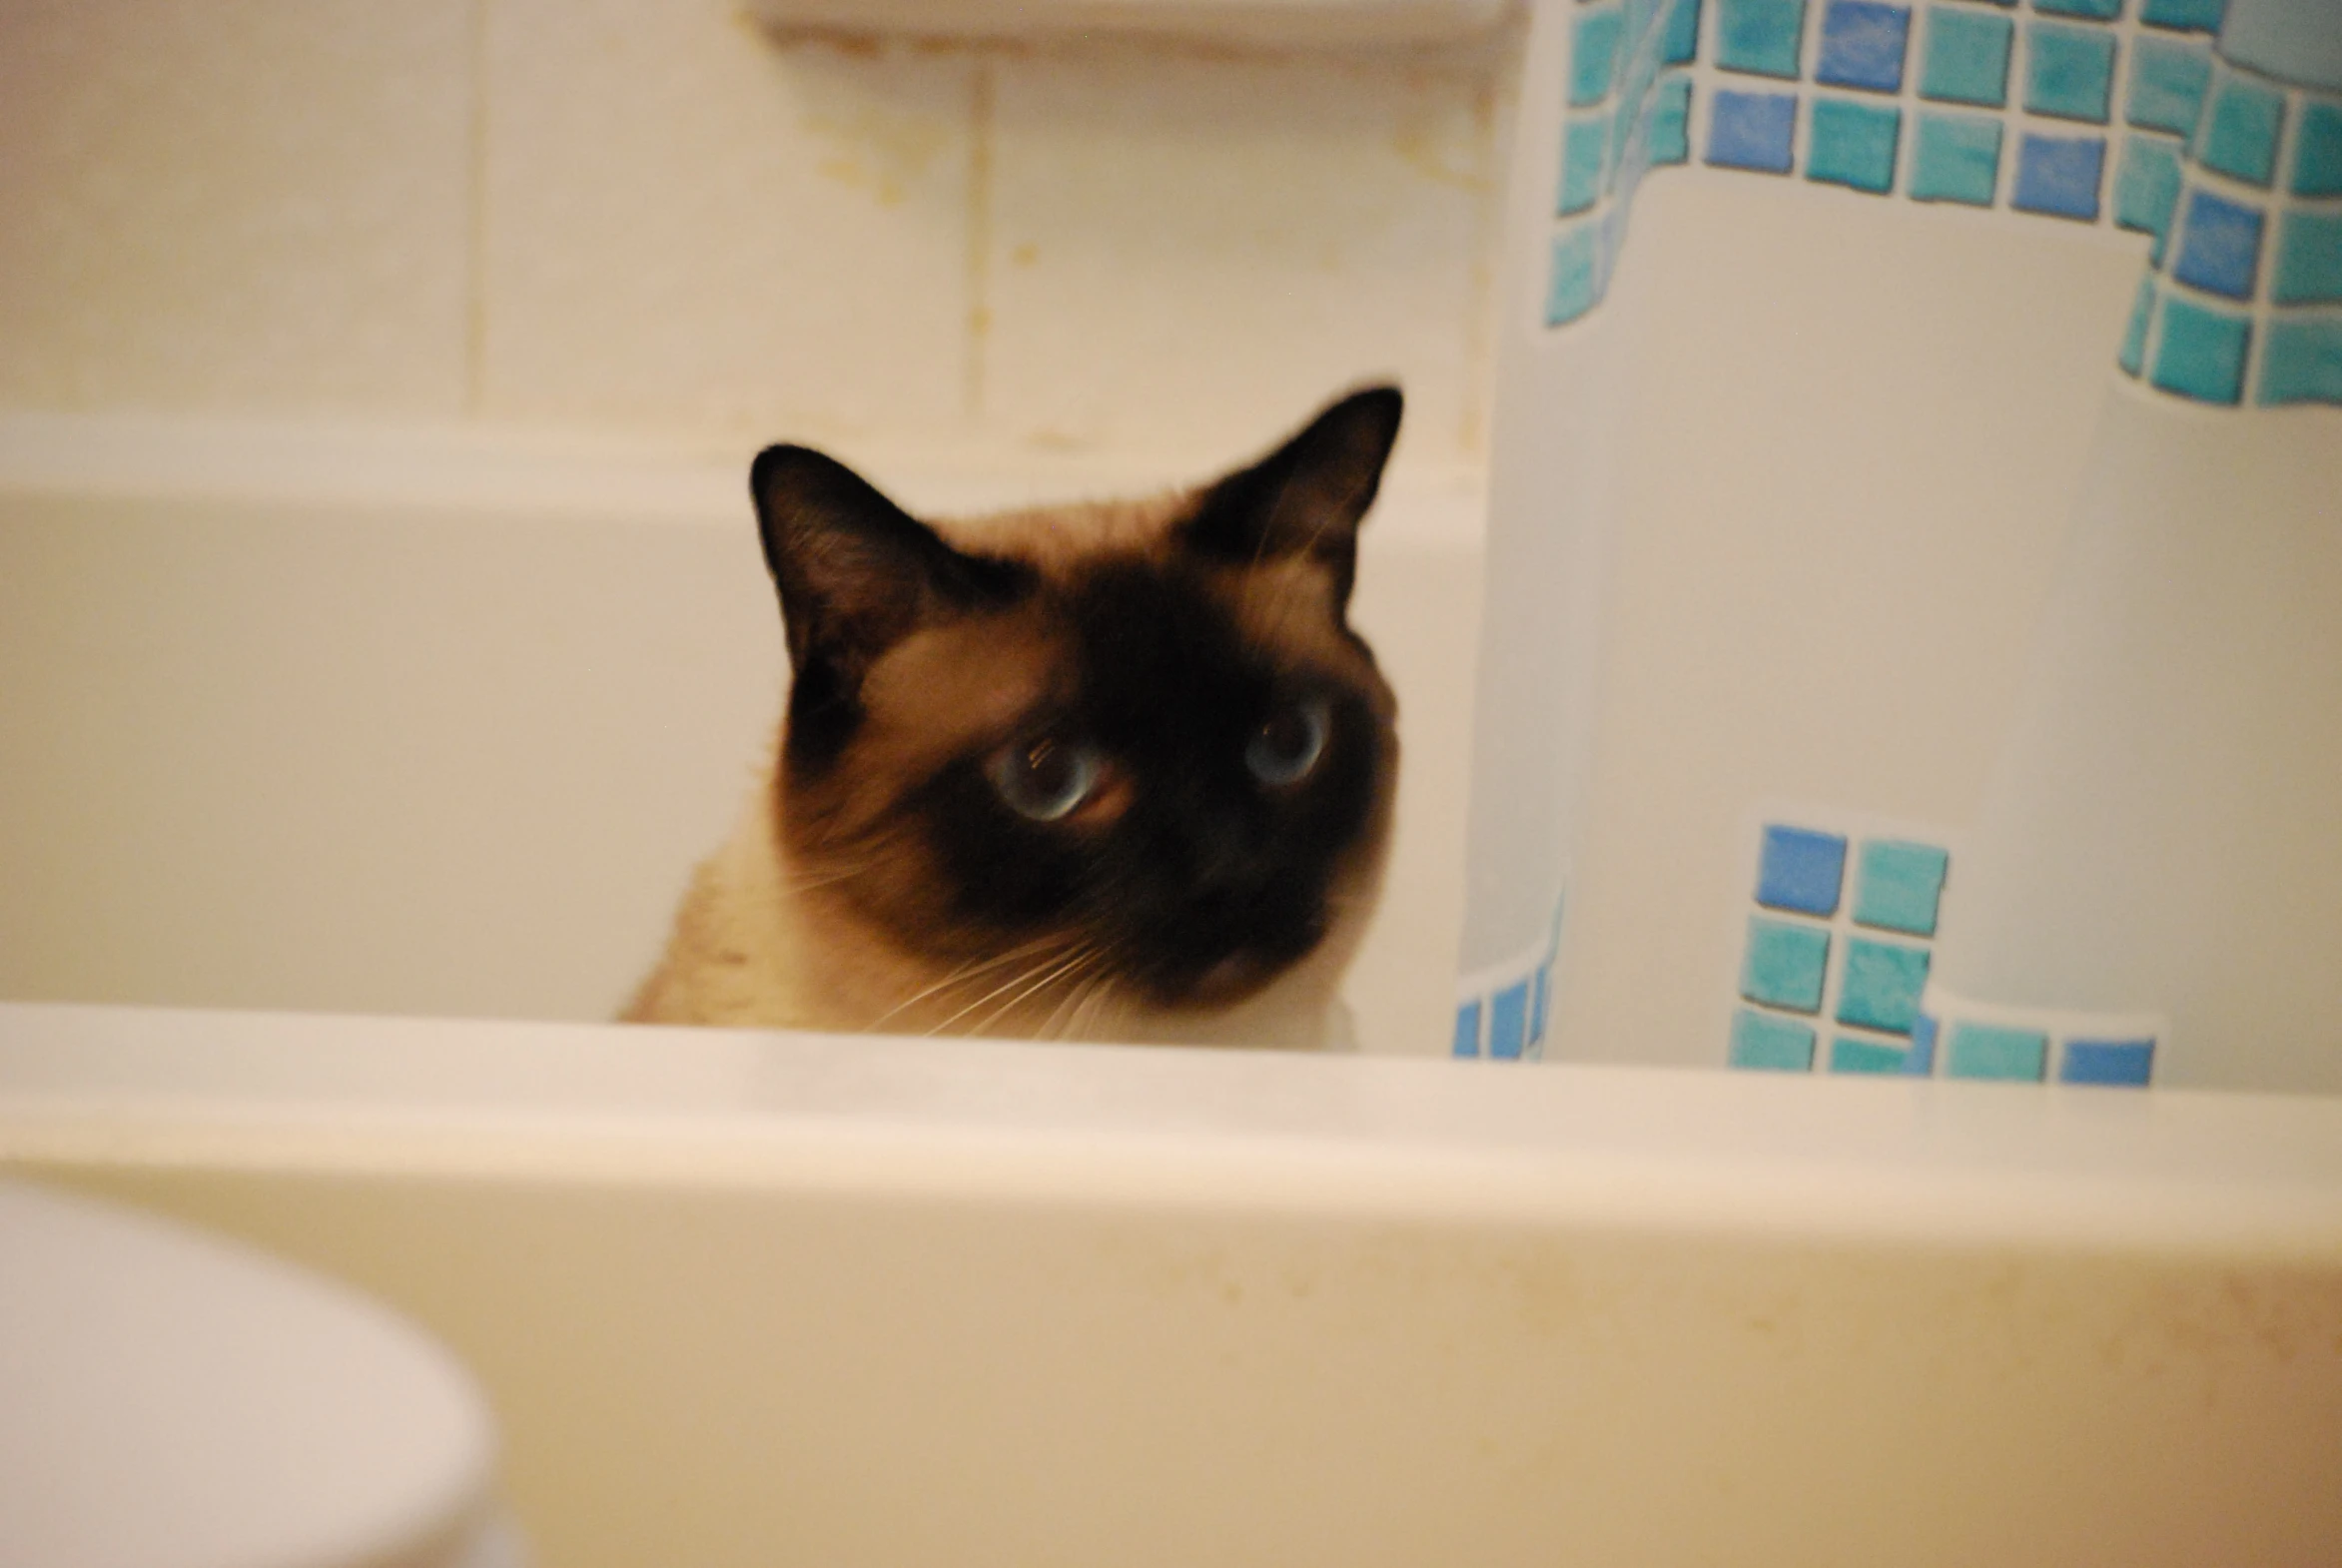 cat sitting in the bath tub with the curtain open